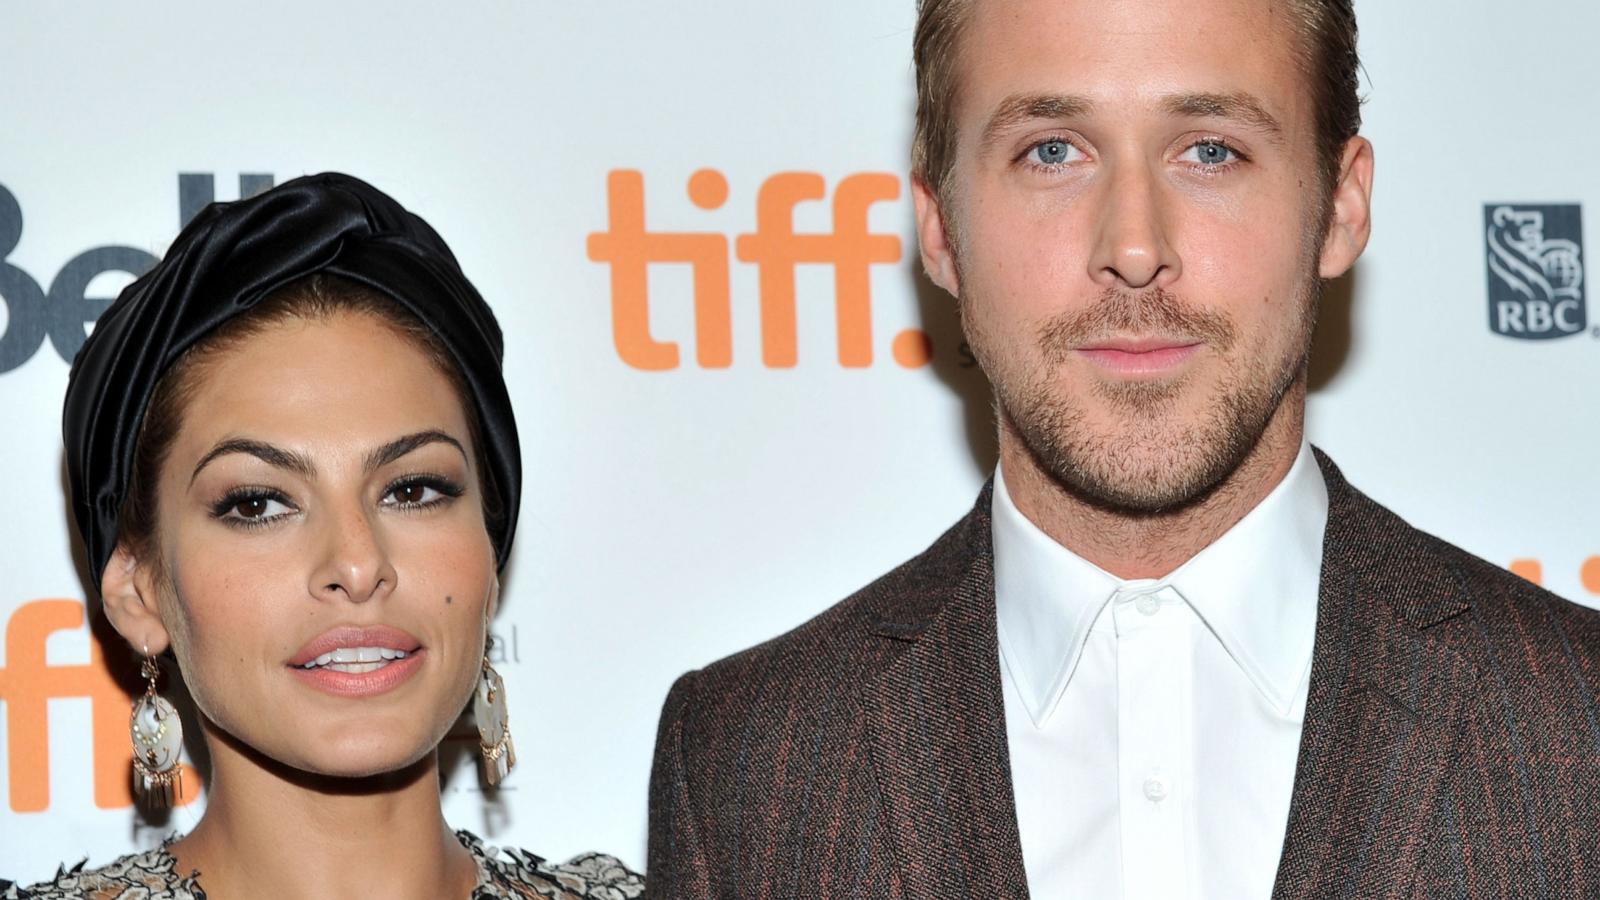 PHOTO: Eva Mendes and Ryan Gosling attend "The Place Beyond The Pines" premiere in Toronto, Canada, Sep. 7, 2012.